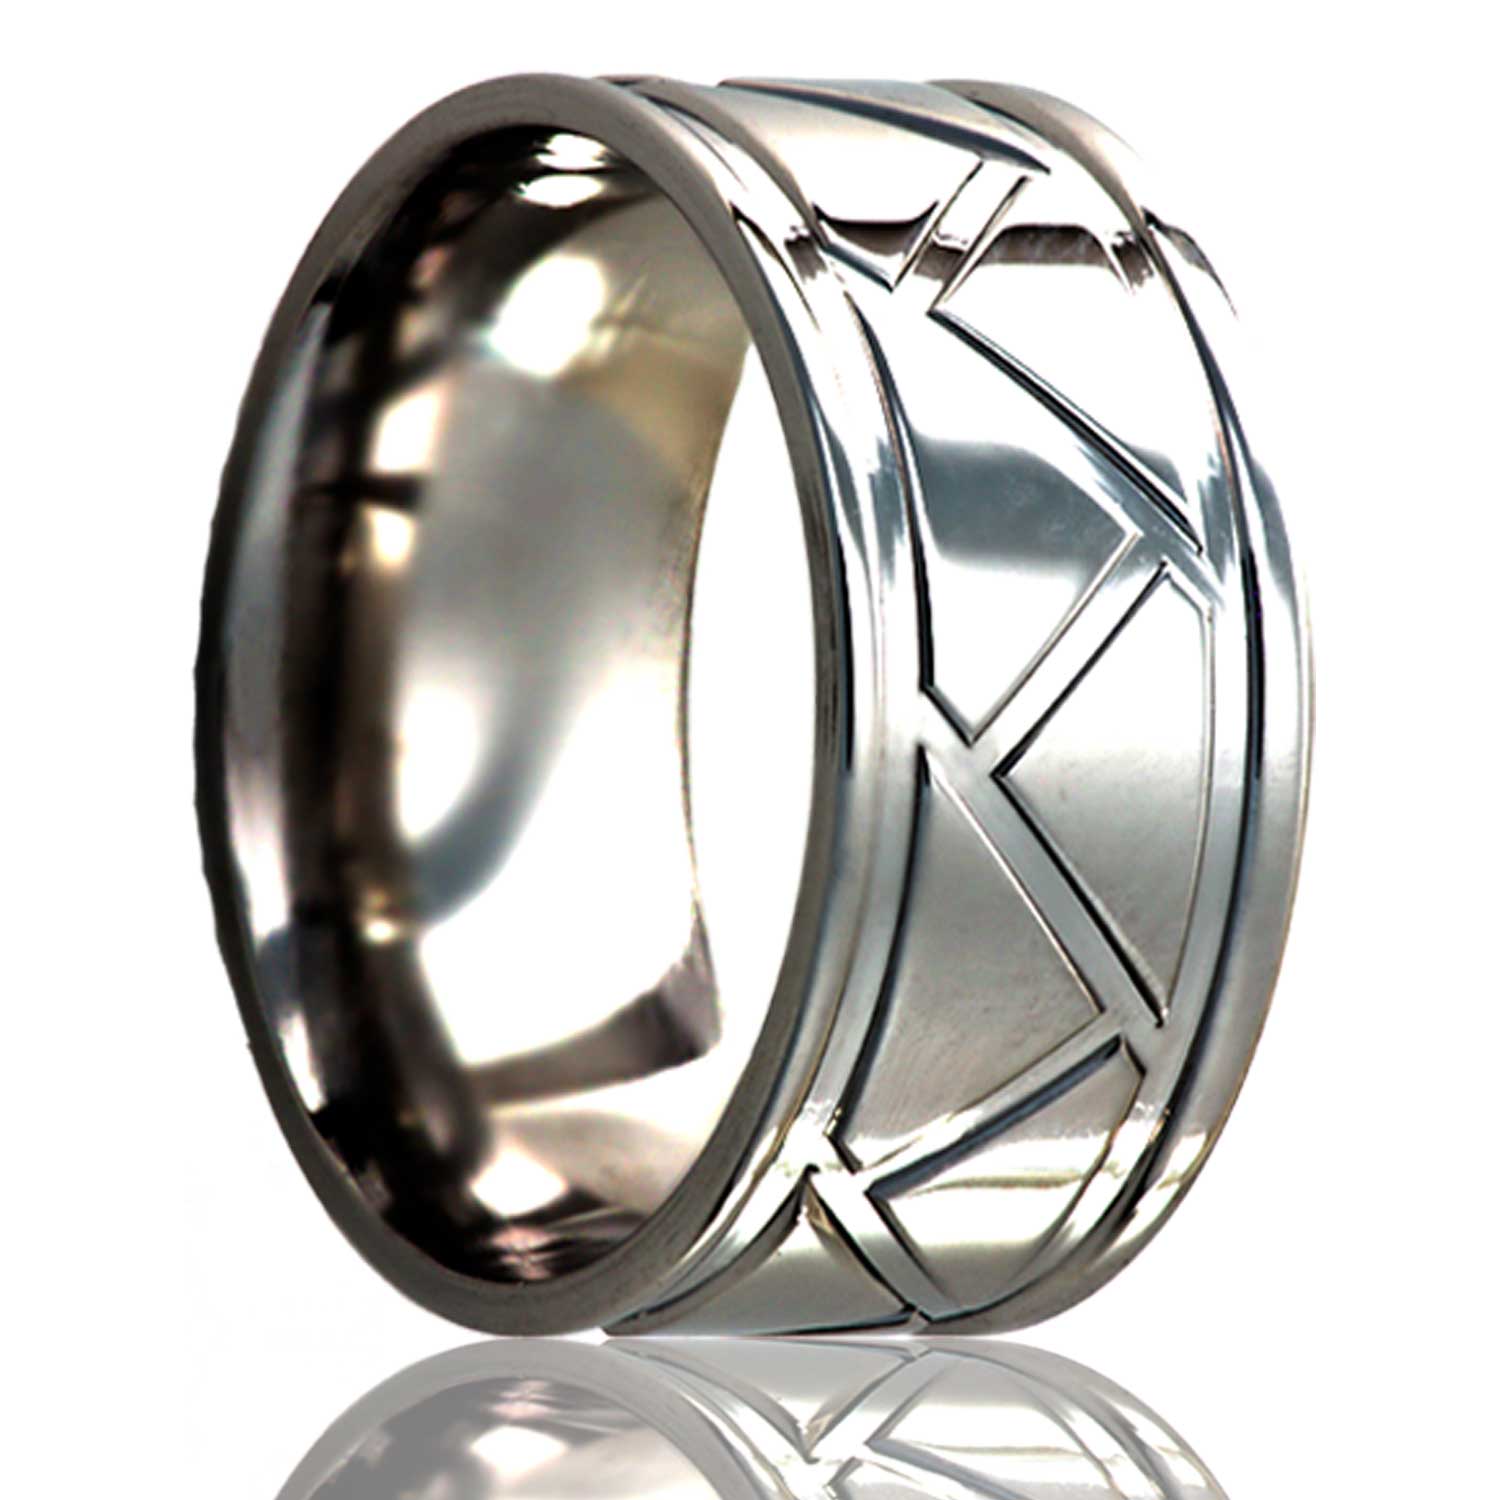 A grooved triangles titanium wedding band displayed on a neutral white background.